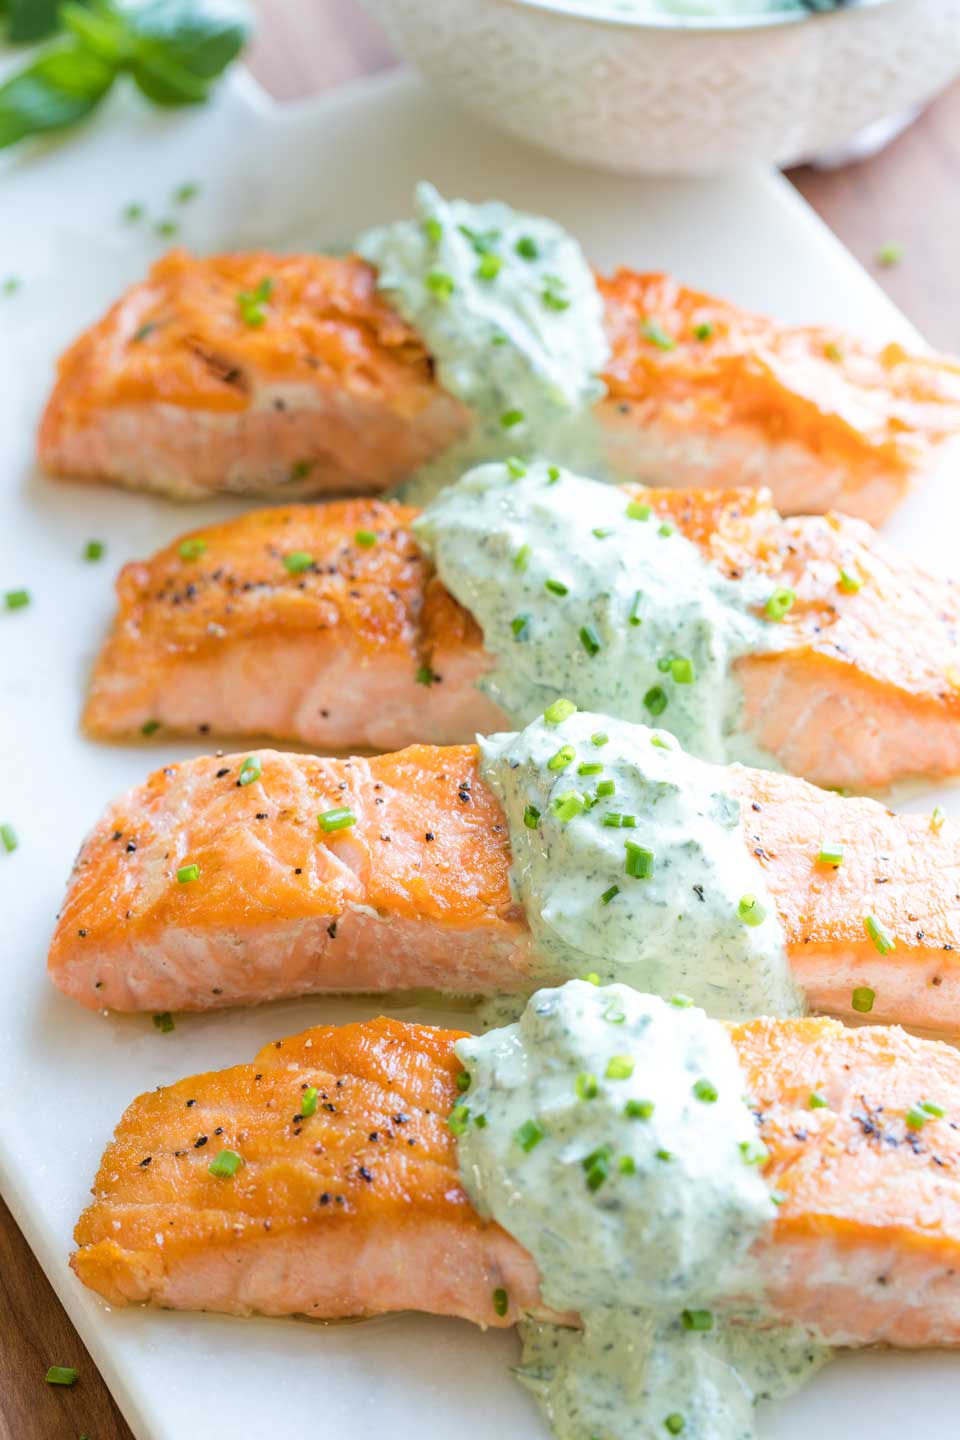 Four salmon fillets served on a white tray, so you can see the pan seared top crust, draped across the center of each fillet with the tzatziki sauce and sprinkled with chopped chives for serving.